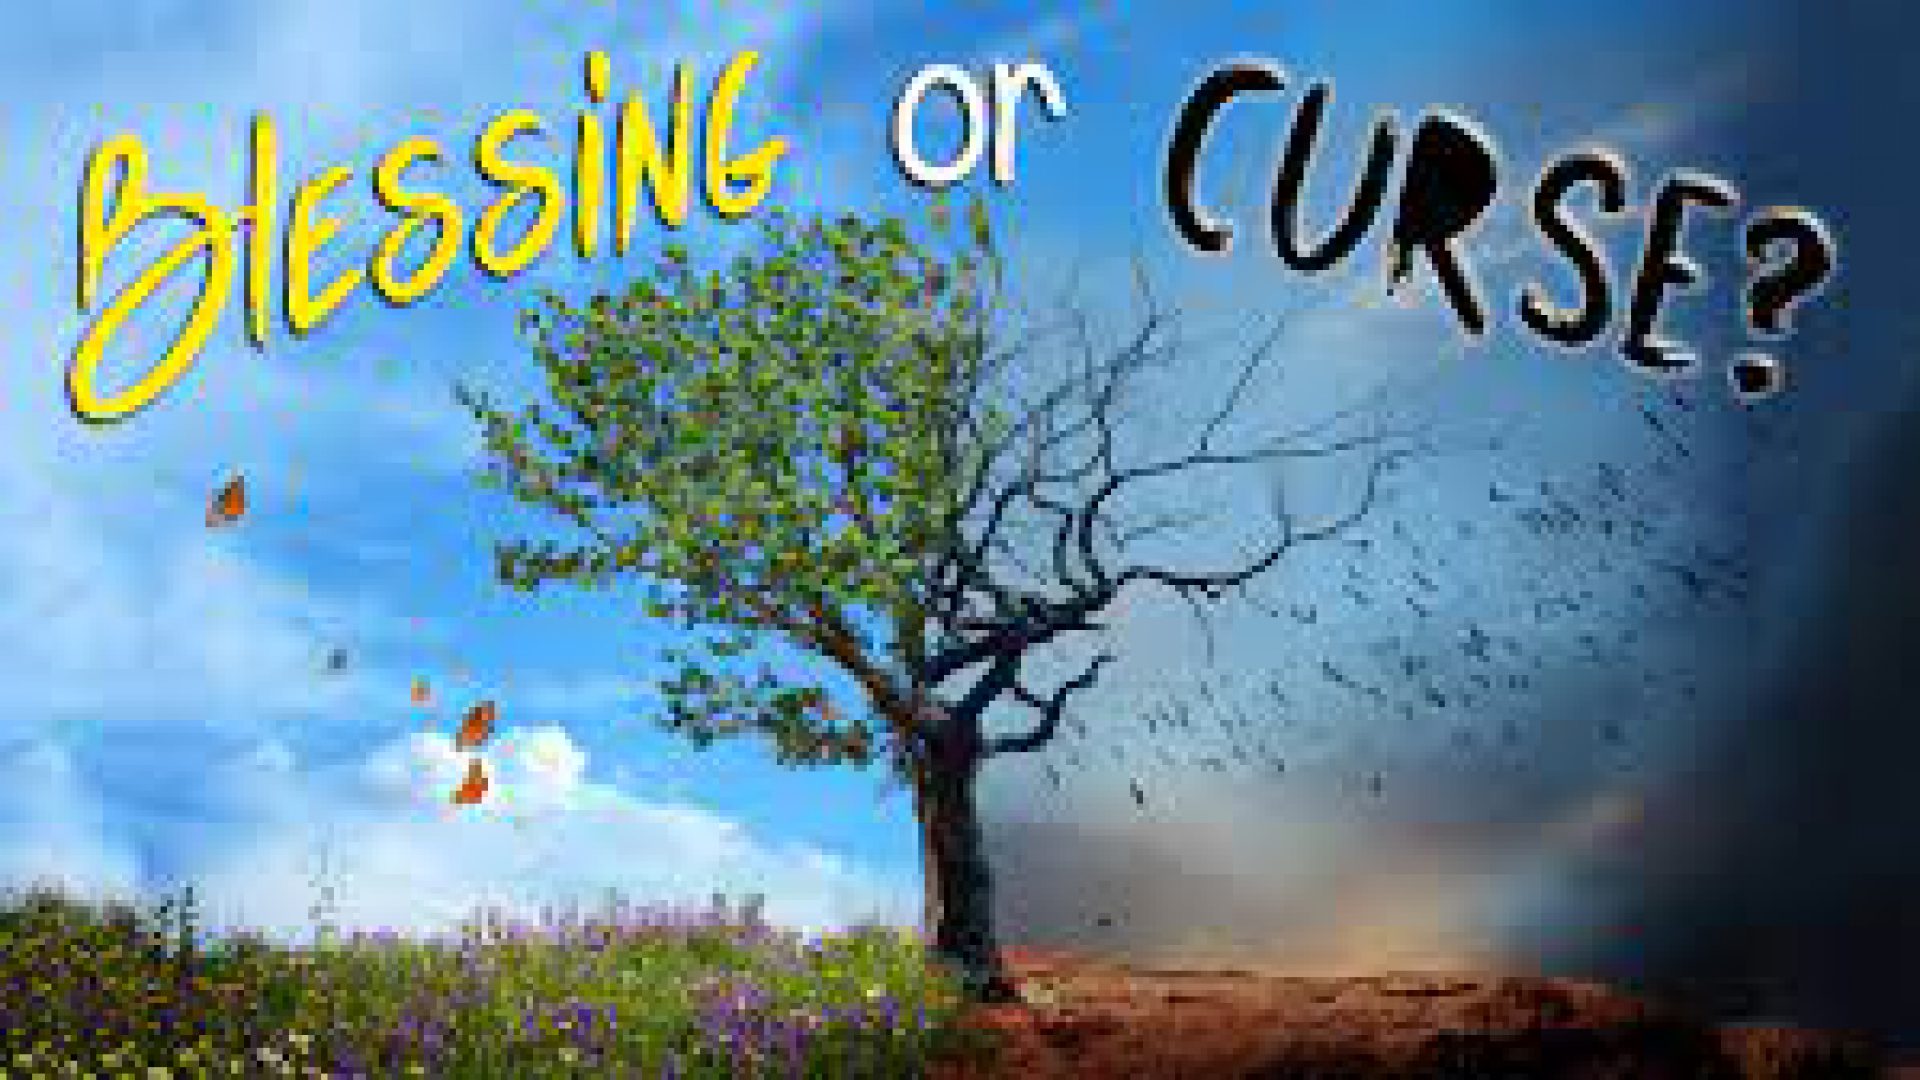 BLESSING OR CURSING?